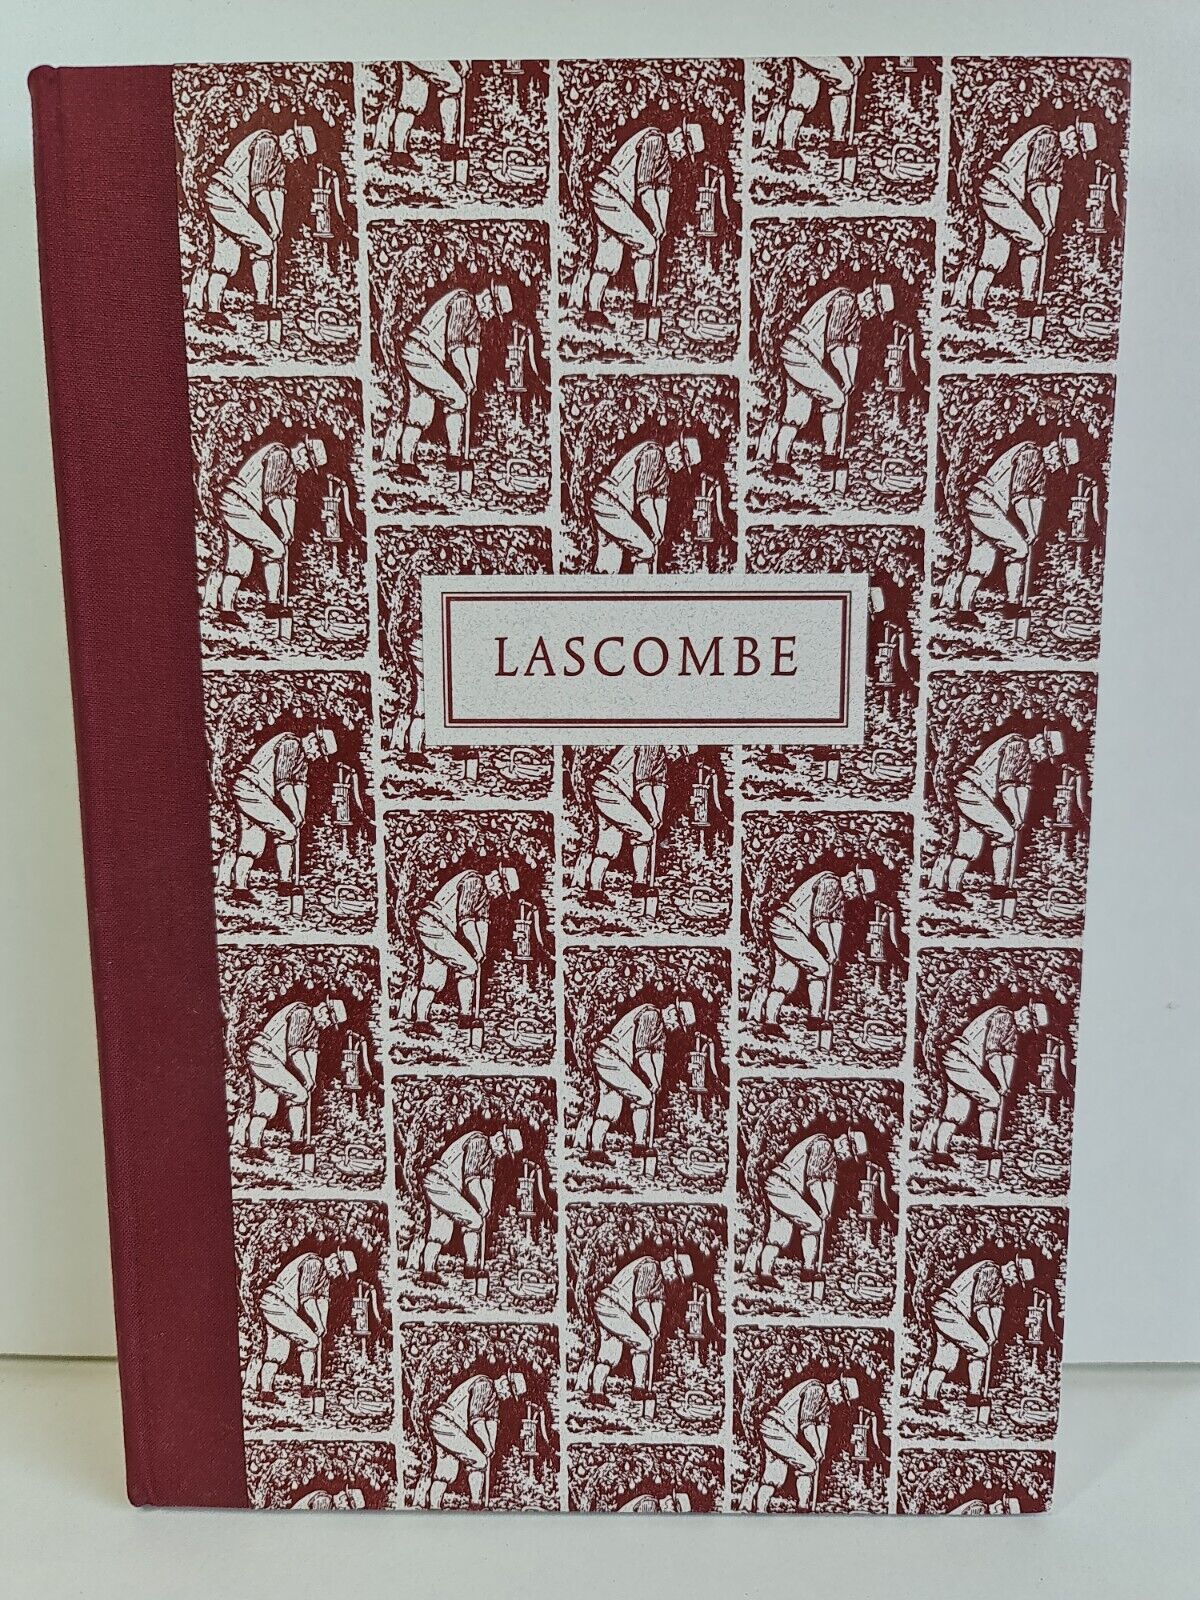 SIGNED Lascombe by Harry Spencer